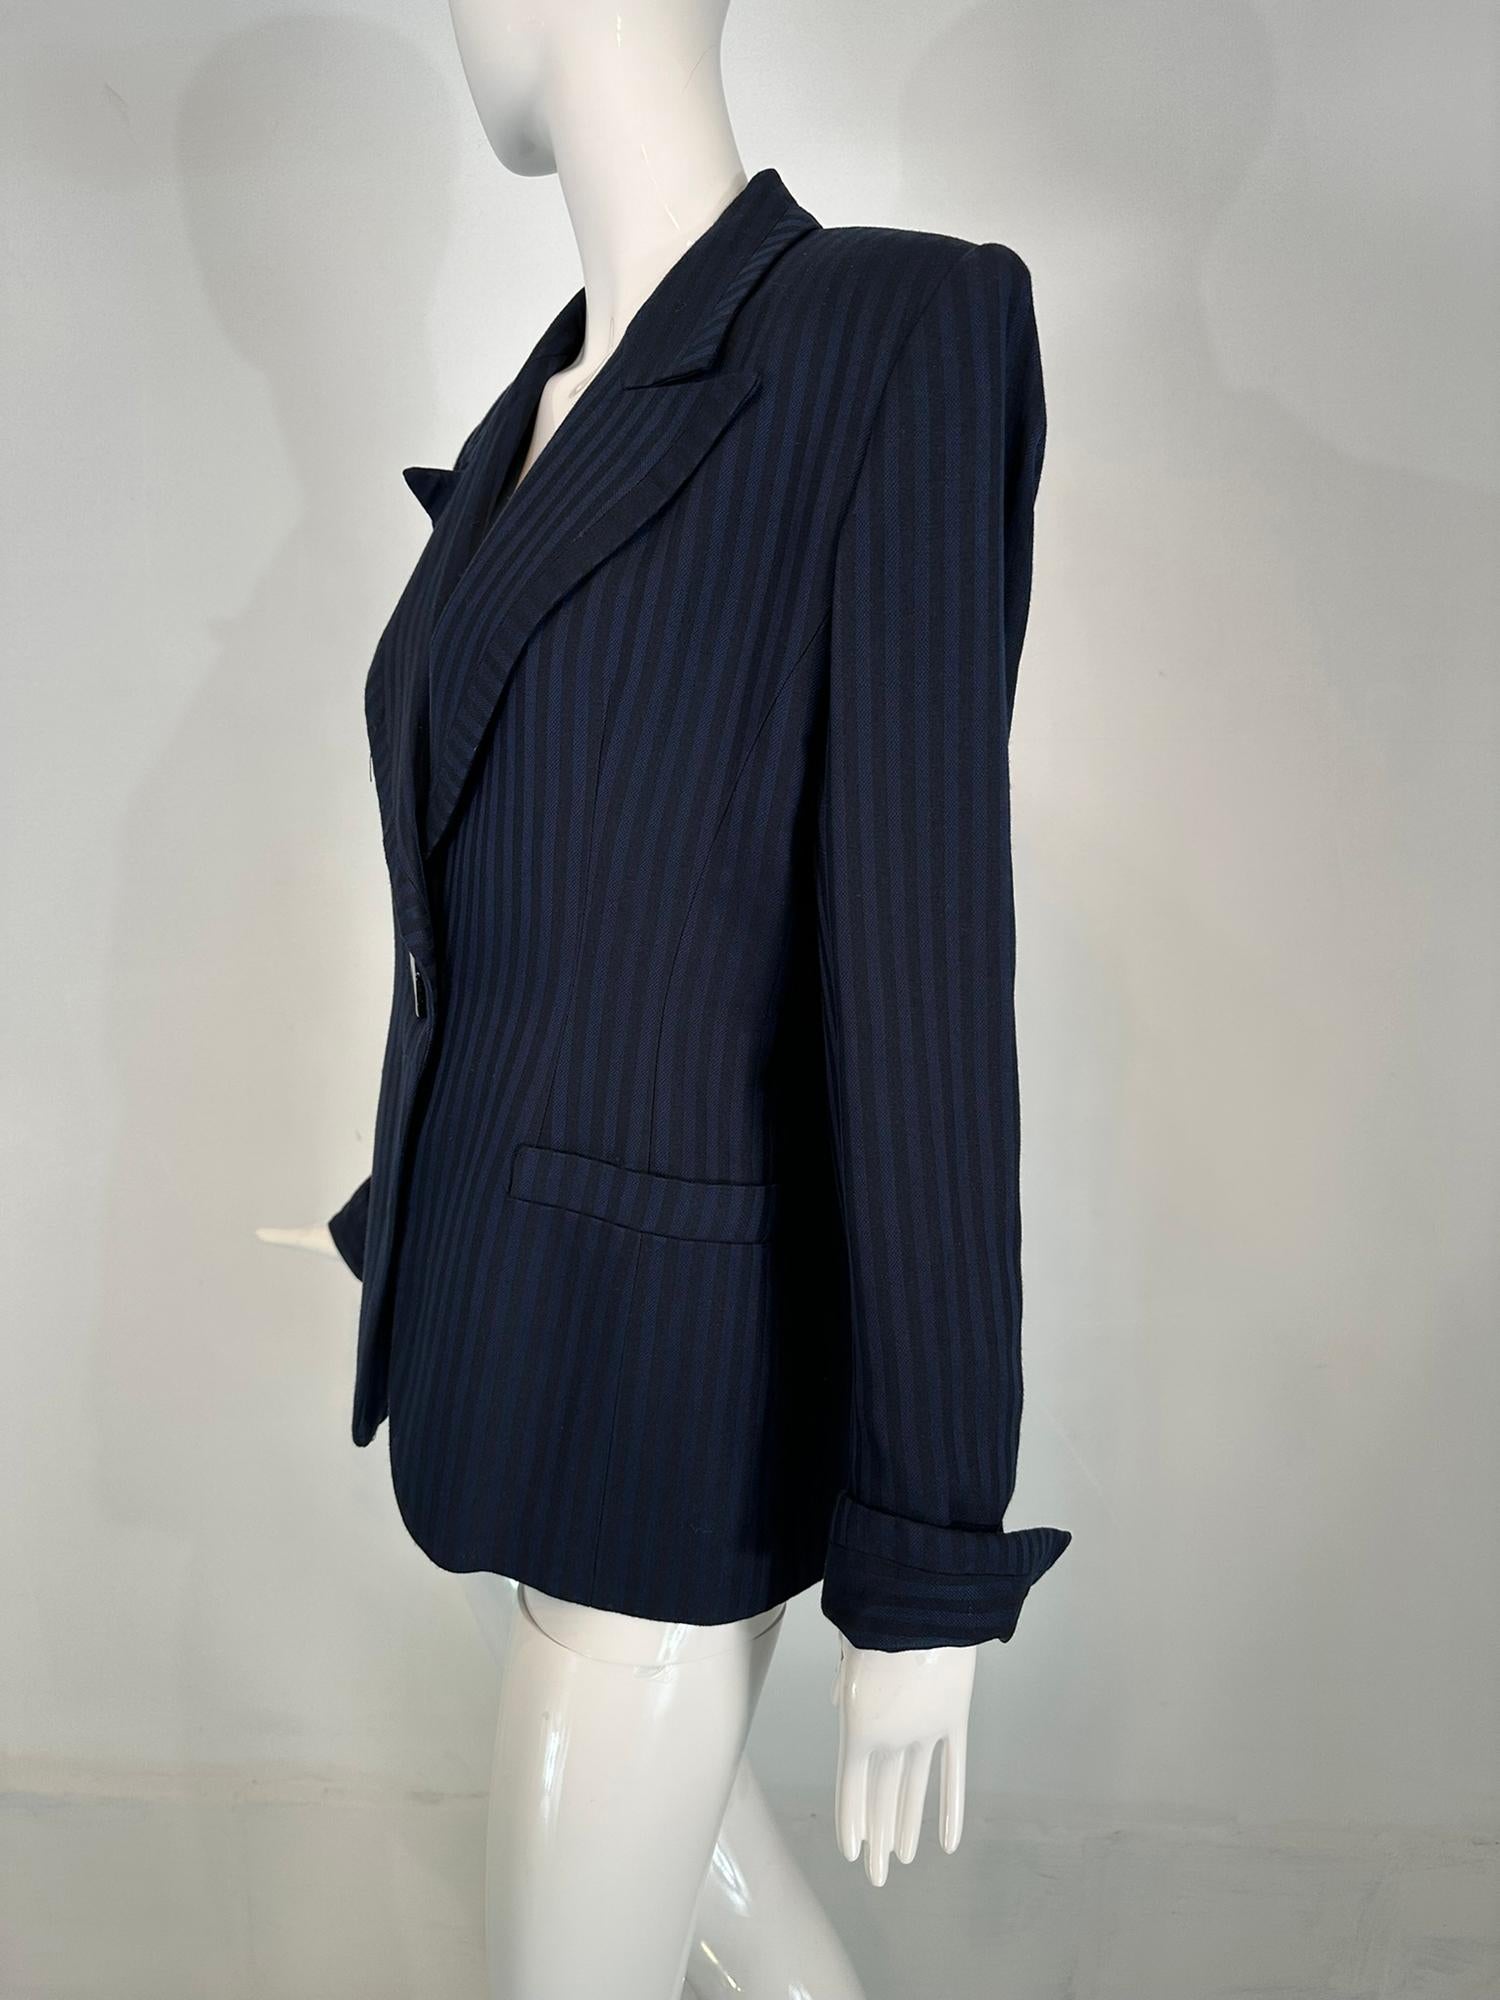 Christian Dior Navy Blue & Black Wide Stripe Wool Twill Jacket Late 90s-2000s 4 For Sale 7